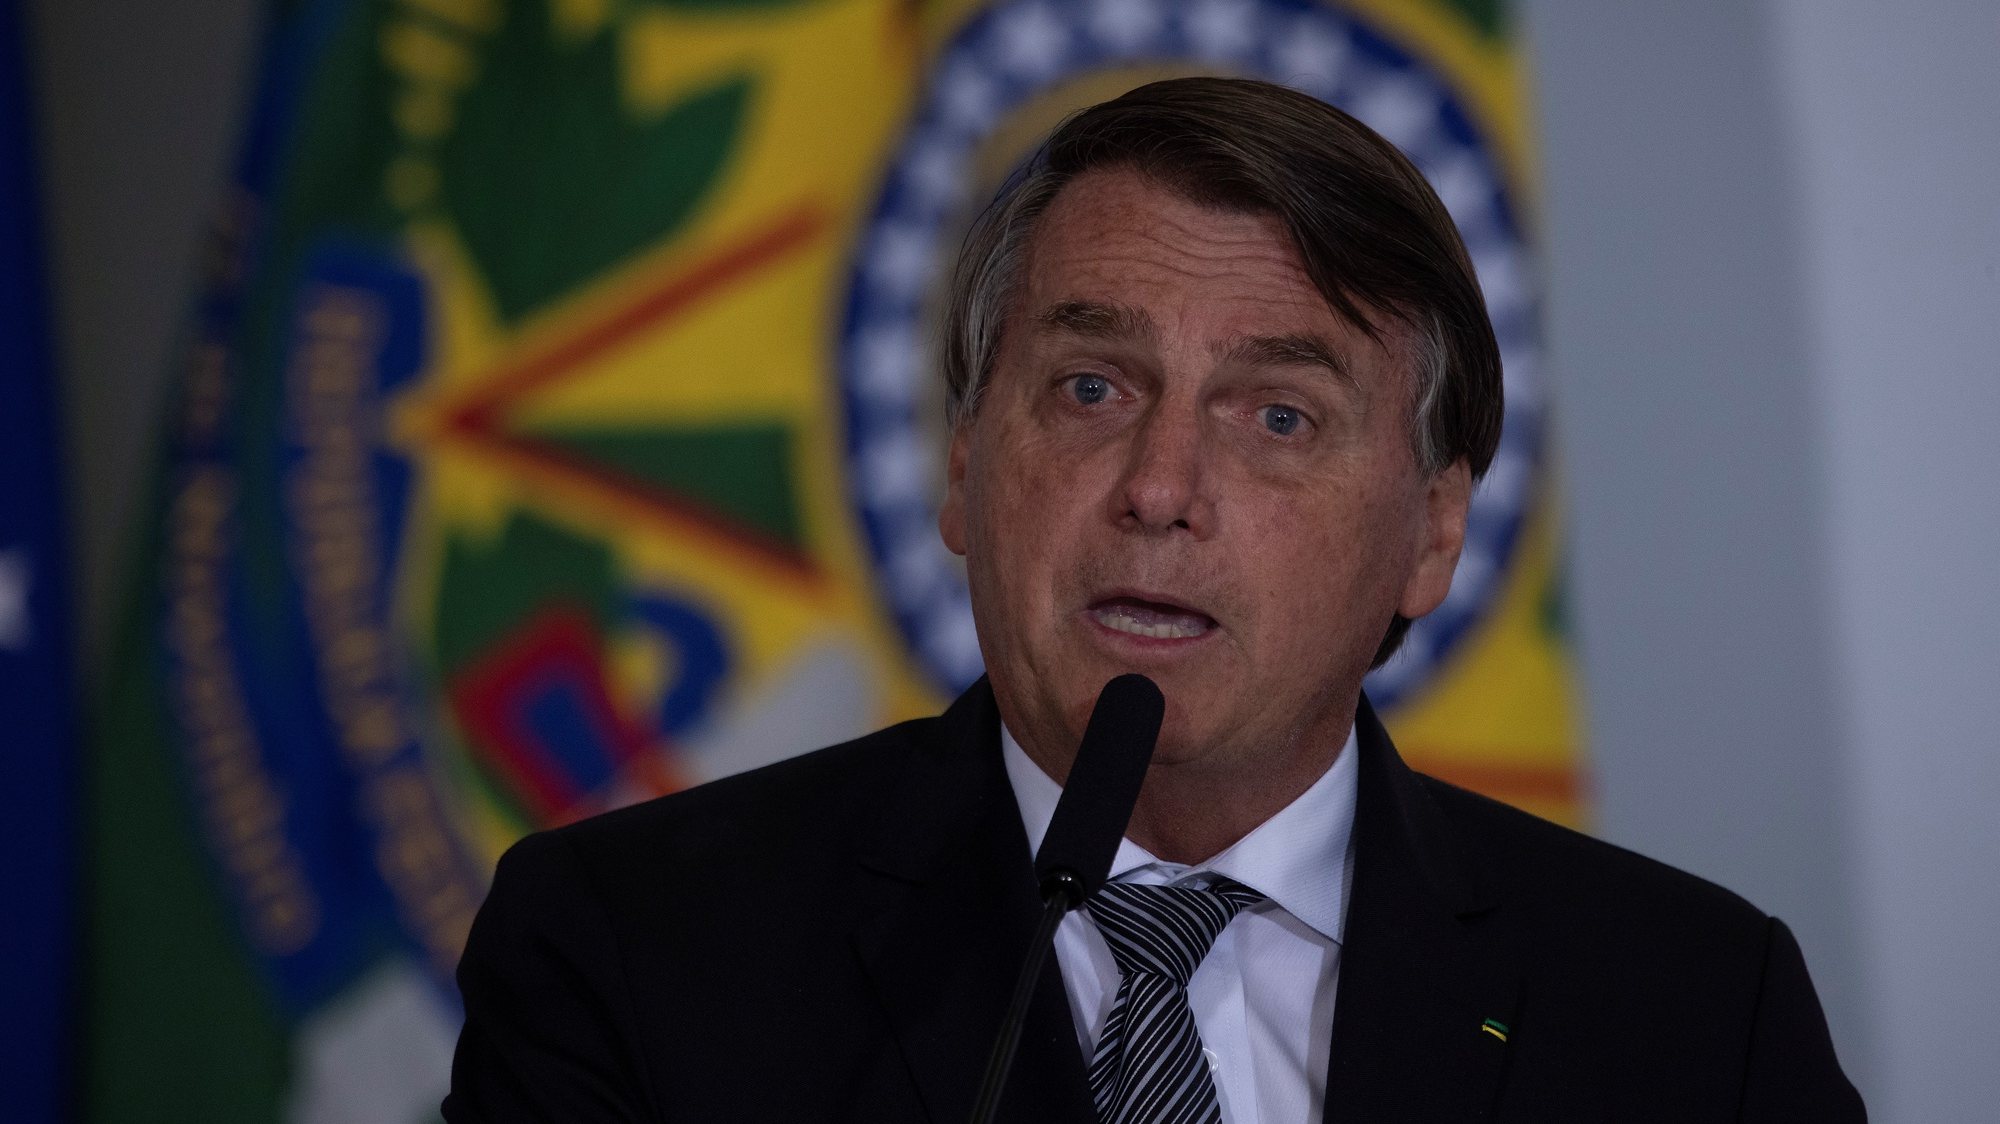 epa08871574 President of Brasil Jair Bolsonaro delivers a speech during the launching of the program &#039;Saude con agente&#039; (Health wit us) at Planalto Presidential Palace in Brasilia, Brazil, 08 December 2020. The program seeks better health indicators and basic attention to Brazilian people.  EPA/JoÃ©dson Alves